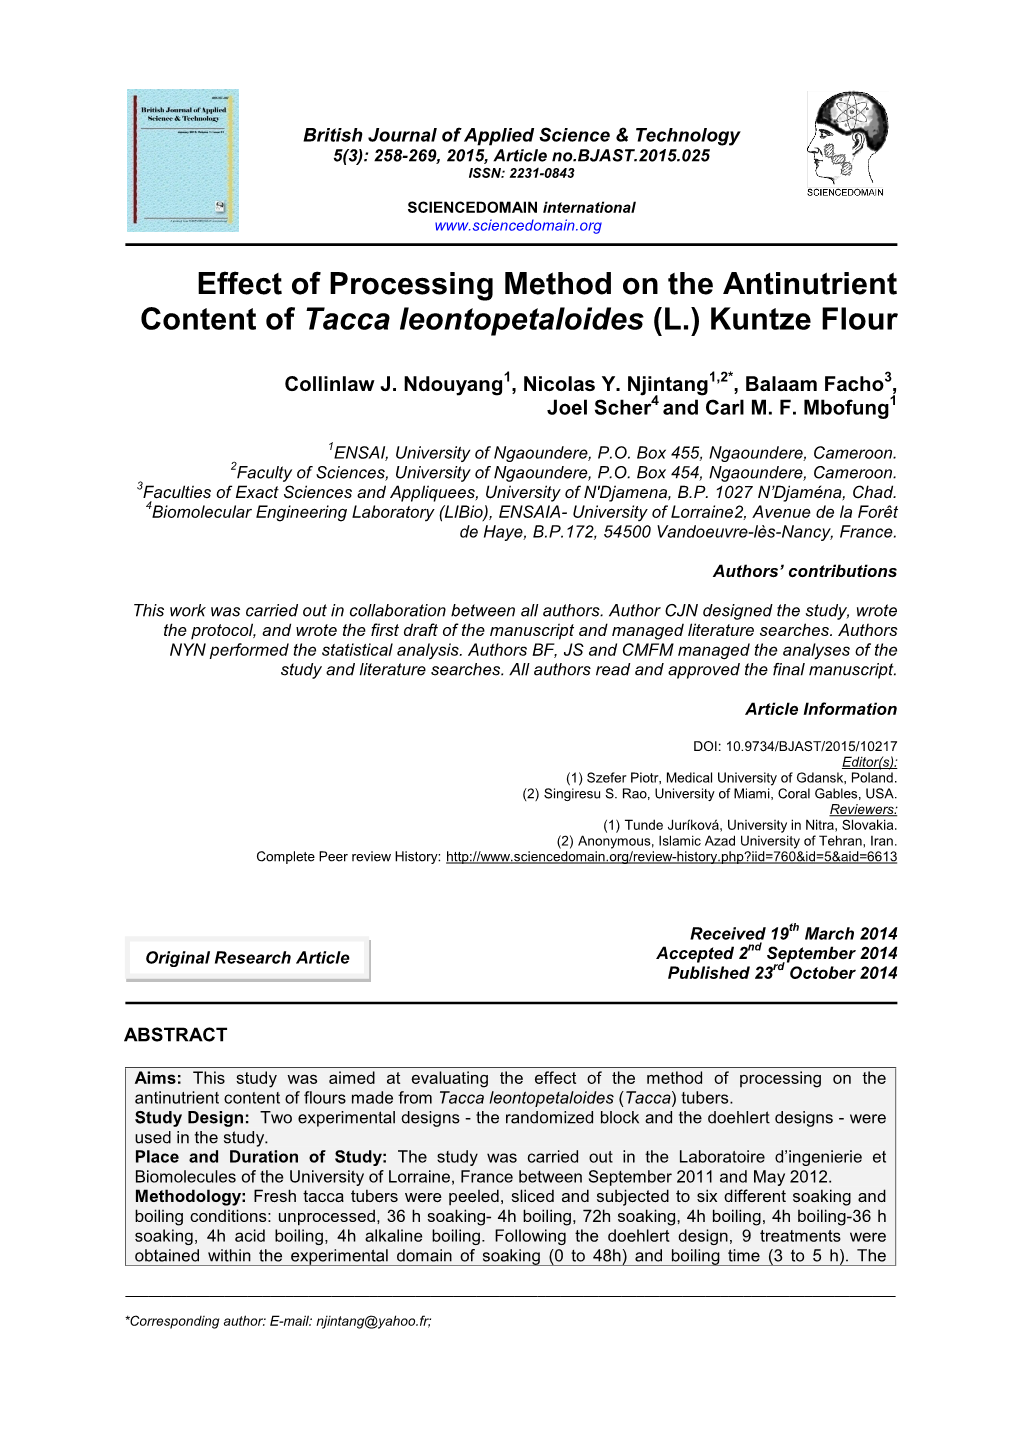 Effect of Processing Method on the Antinutrient Content of Tacca Leontopetaloides (L.) Kuntze Flour